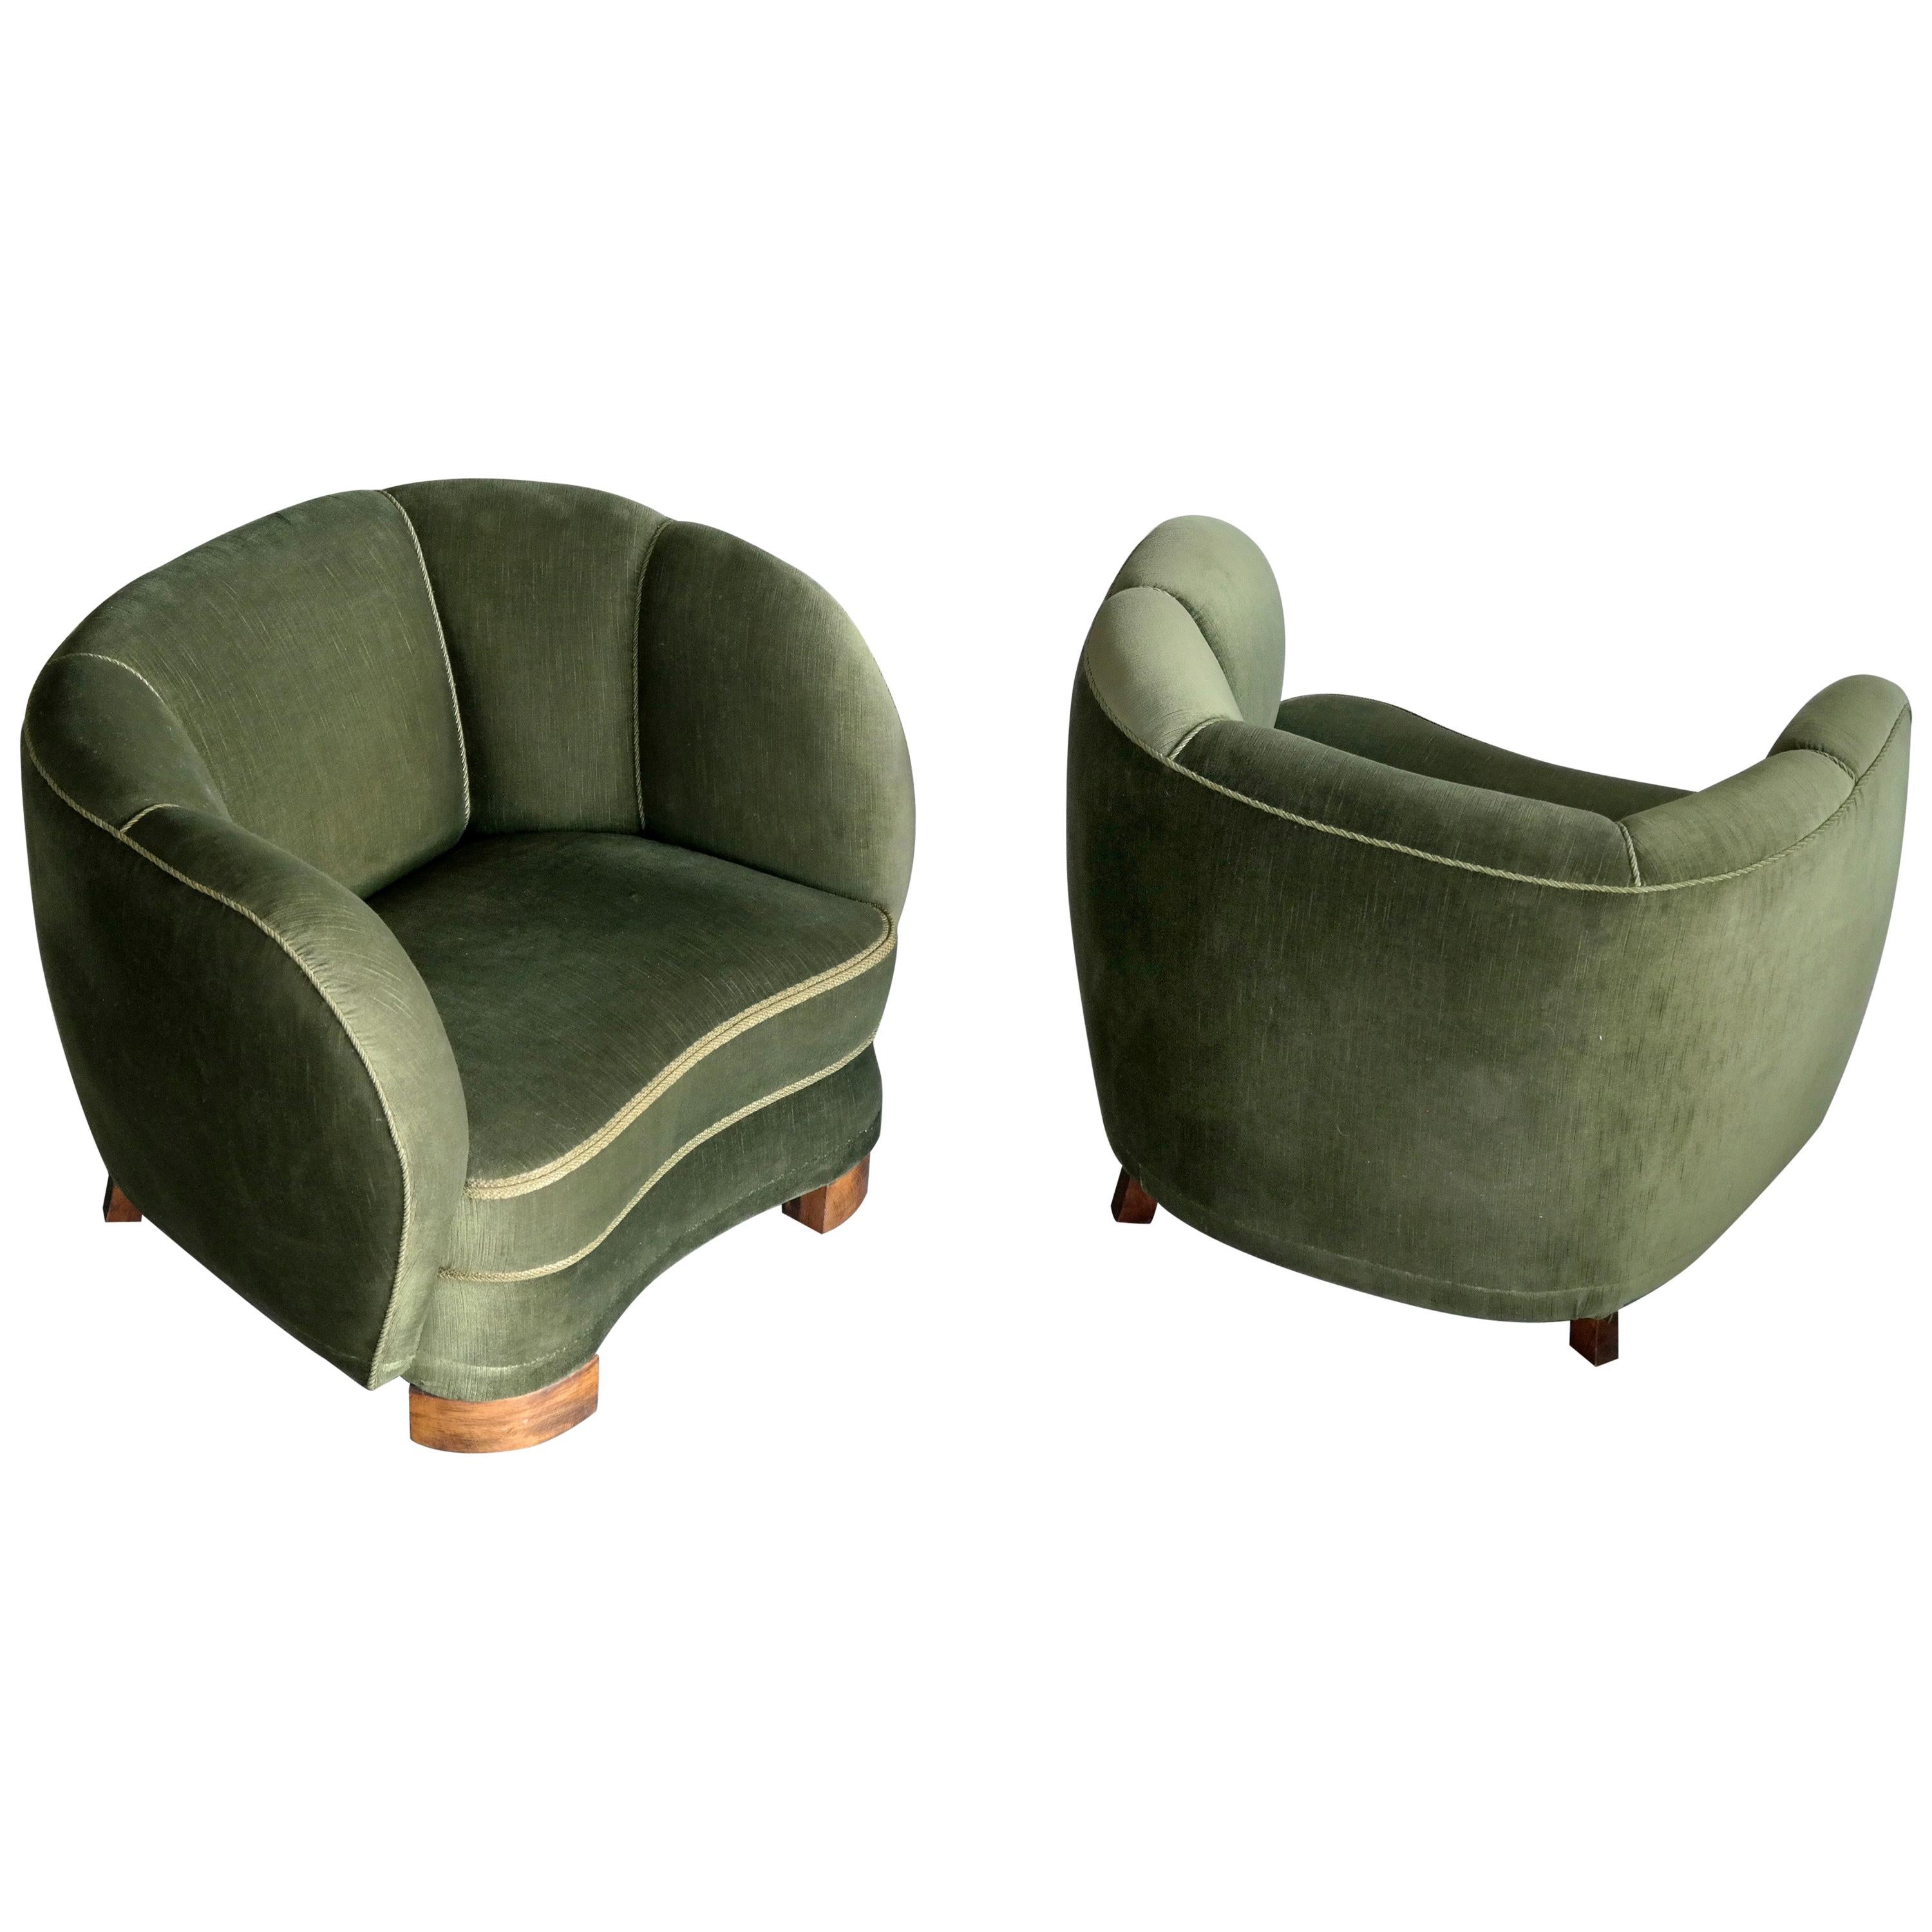 Pair of 1940s Danish Low Club or Lounge Chairs in the Style of Lassen or Boesen